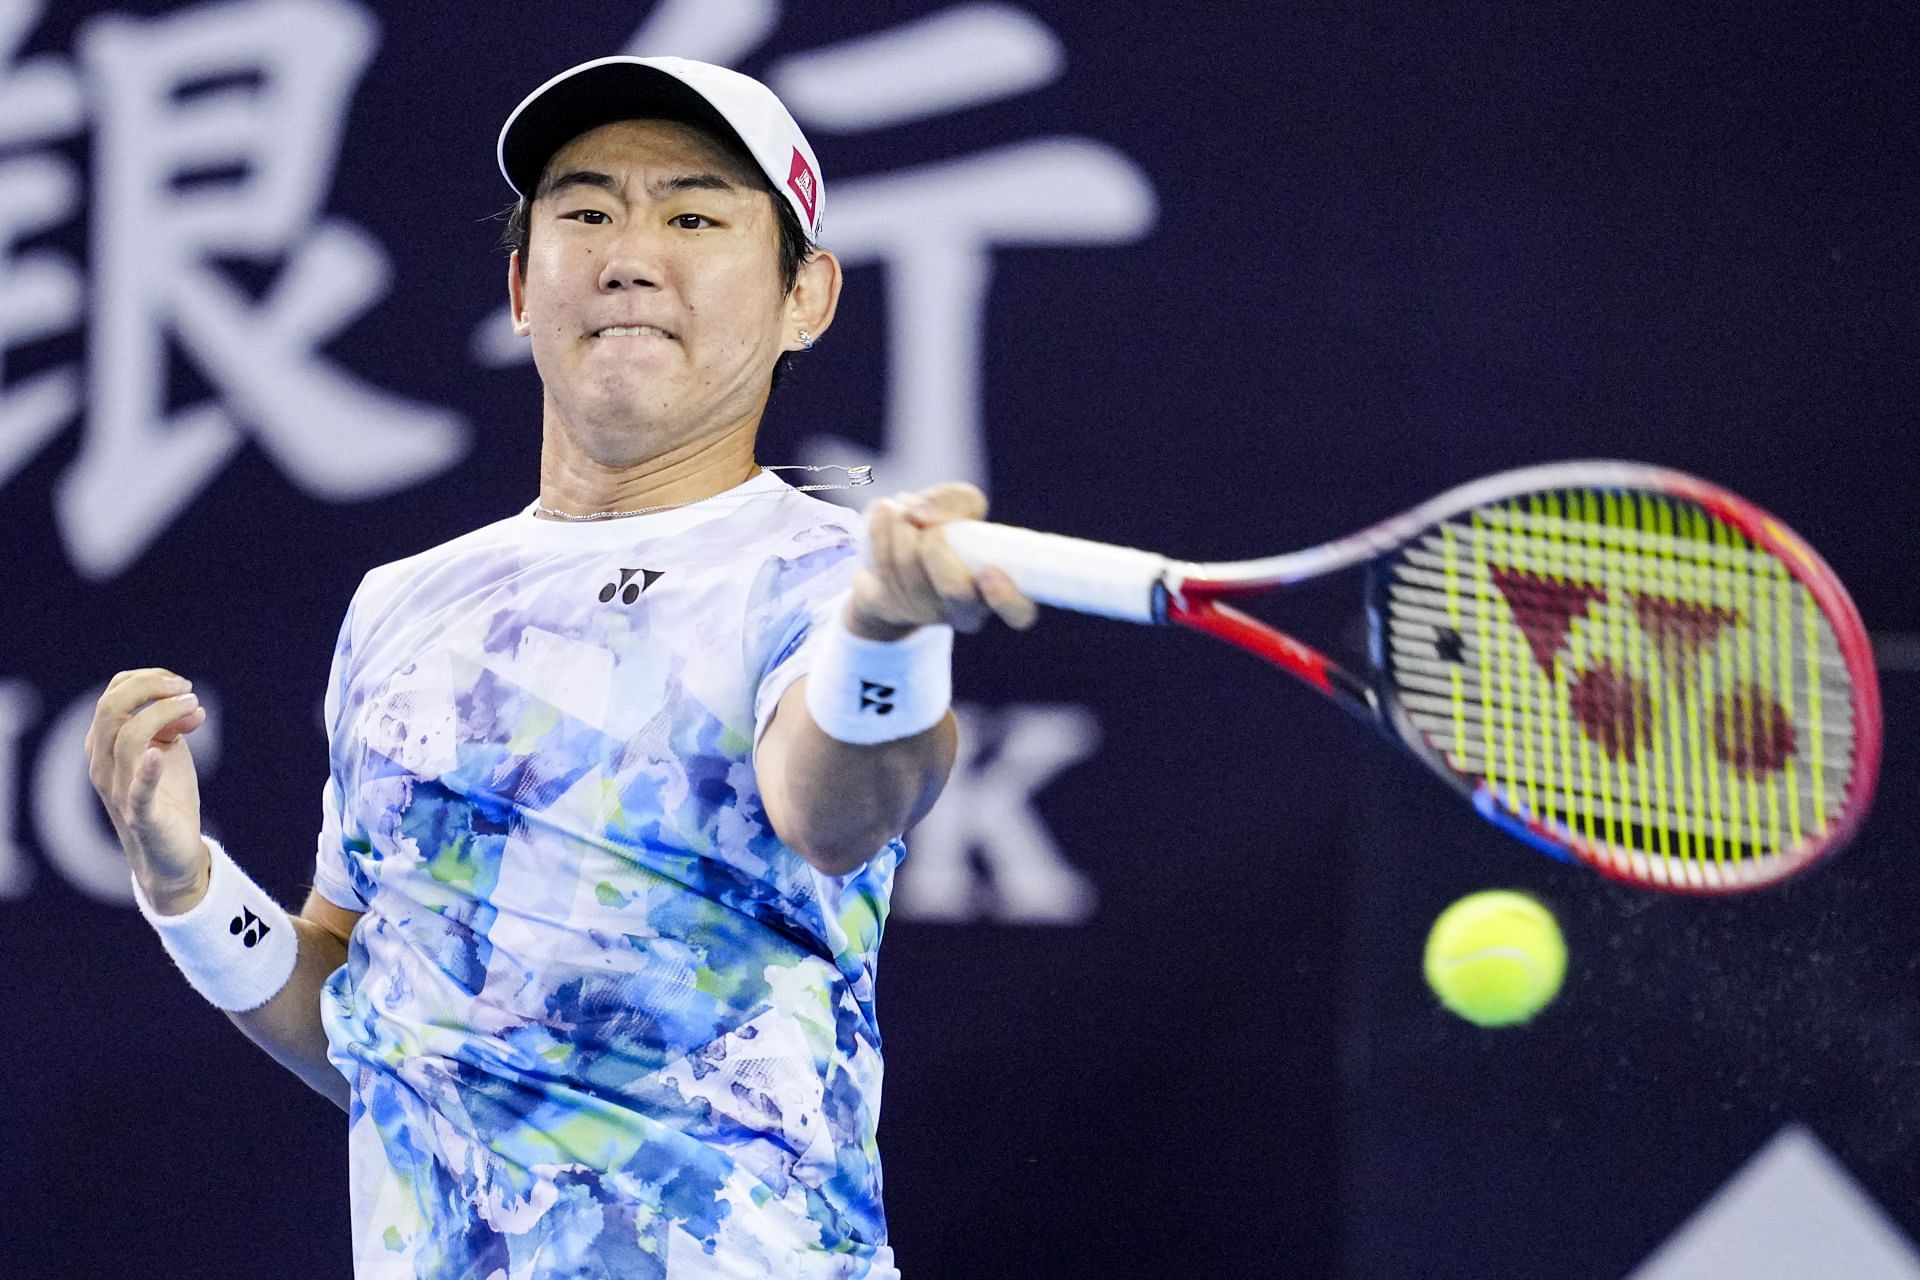 Yoshihito Nishioka is aiming to reach the Dallas Open quarterfinals for the first time.